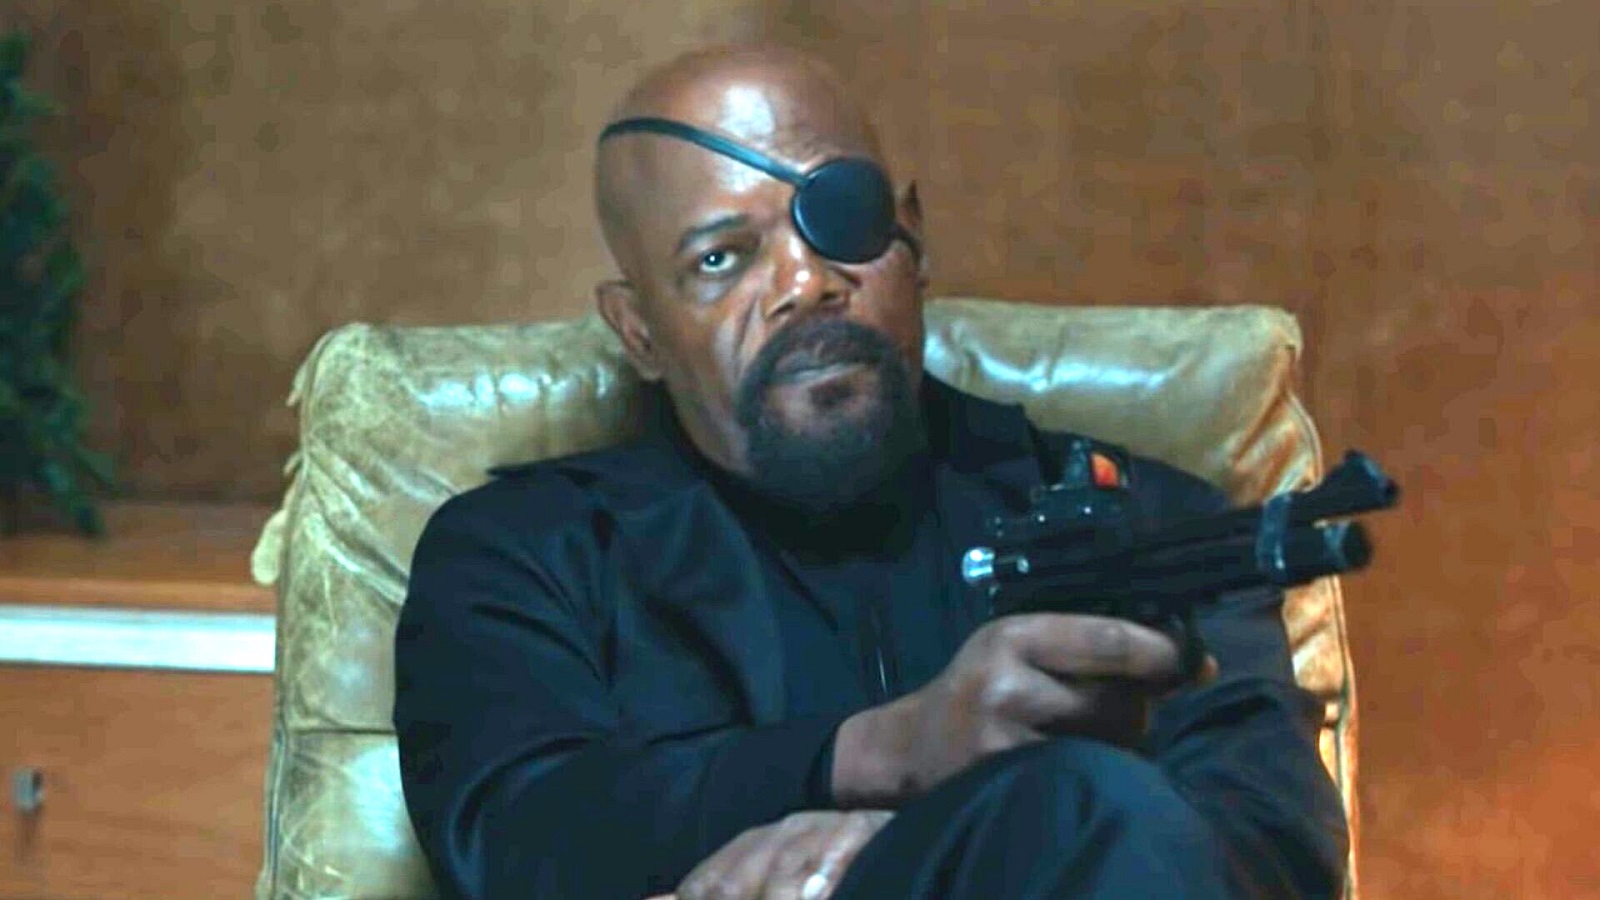 Nick Fury sitting on a couch holding a gun in a scene from Spider-Man: Far From Home